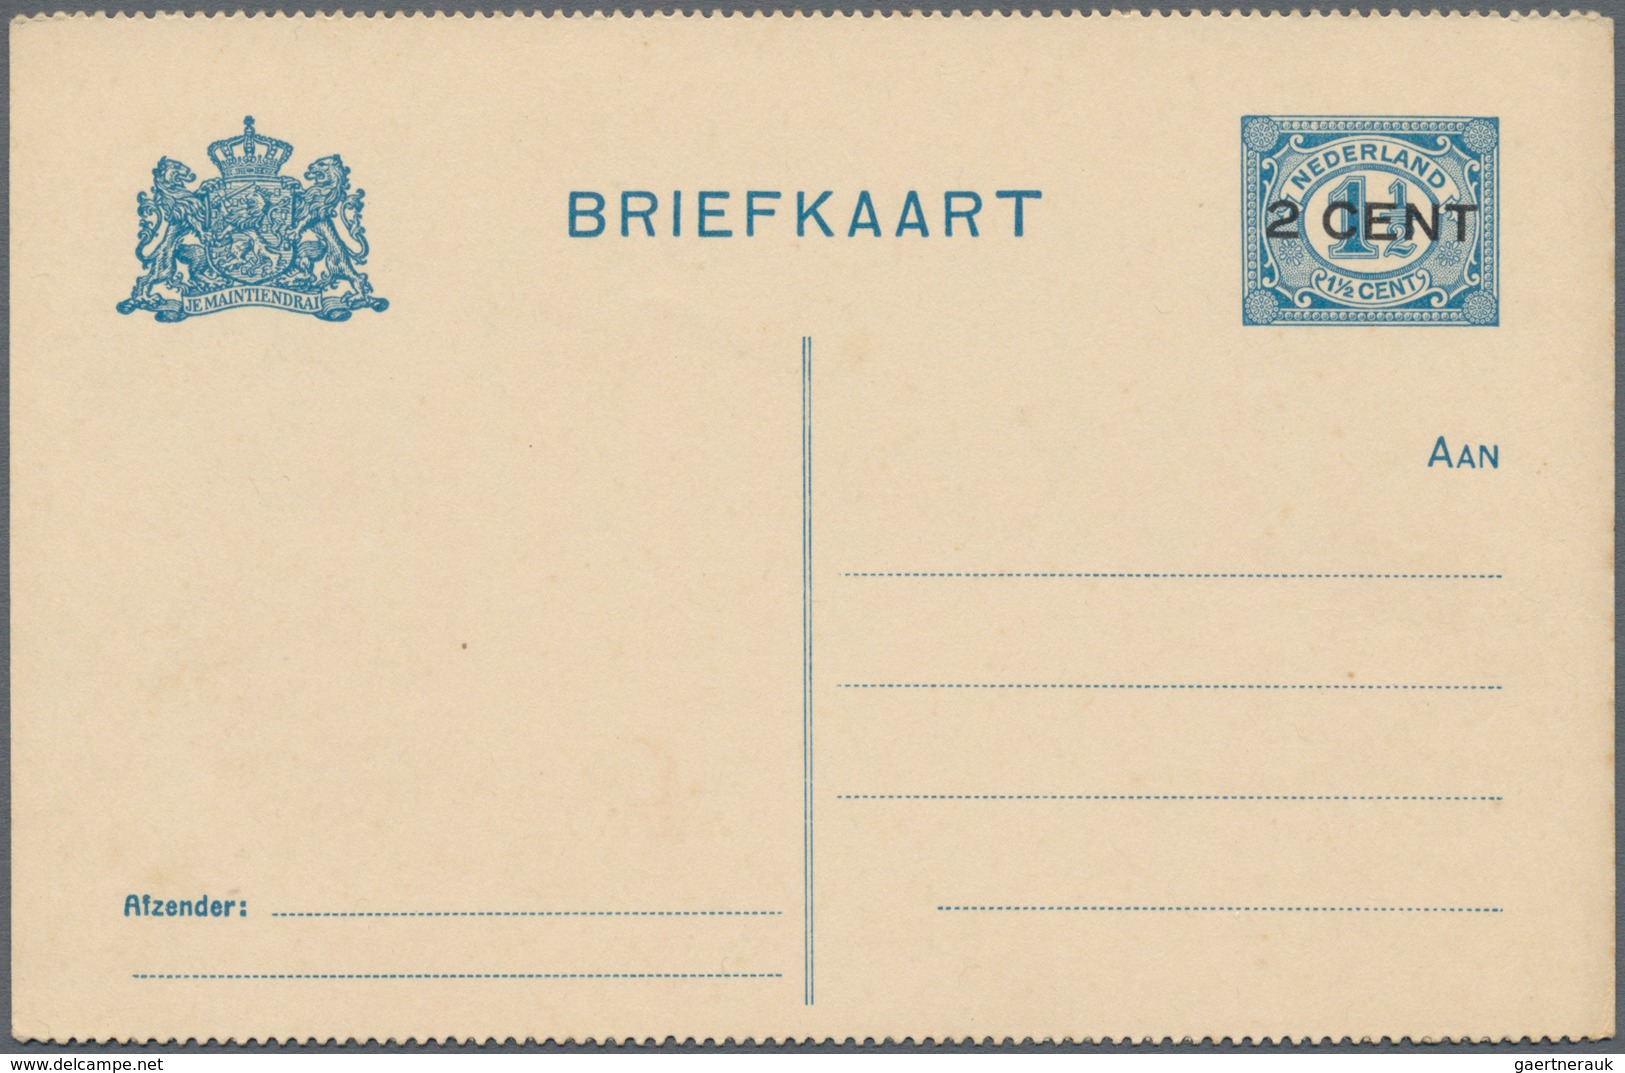 Niederlande: 1864/1997, accumulation of ca. 640 covers, postcards and postal stationeries, incl. pos